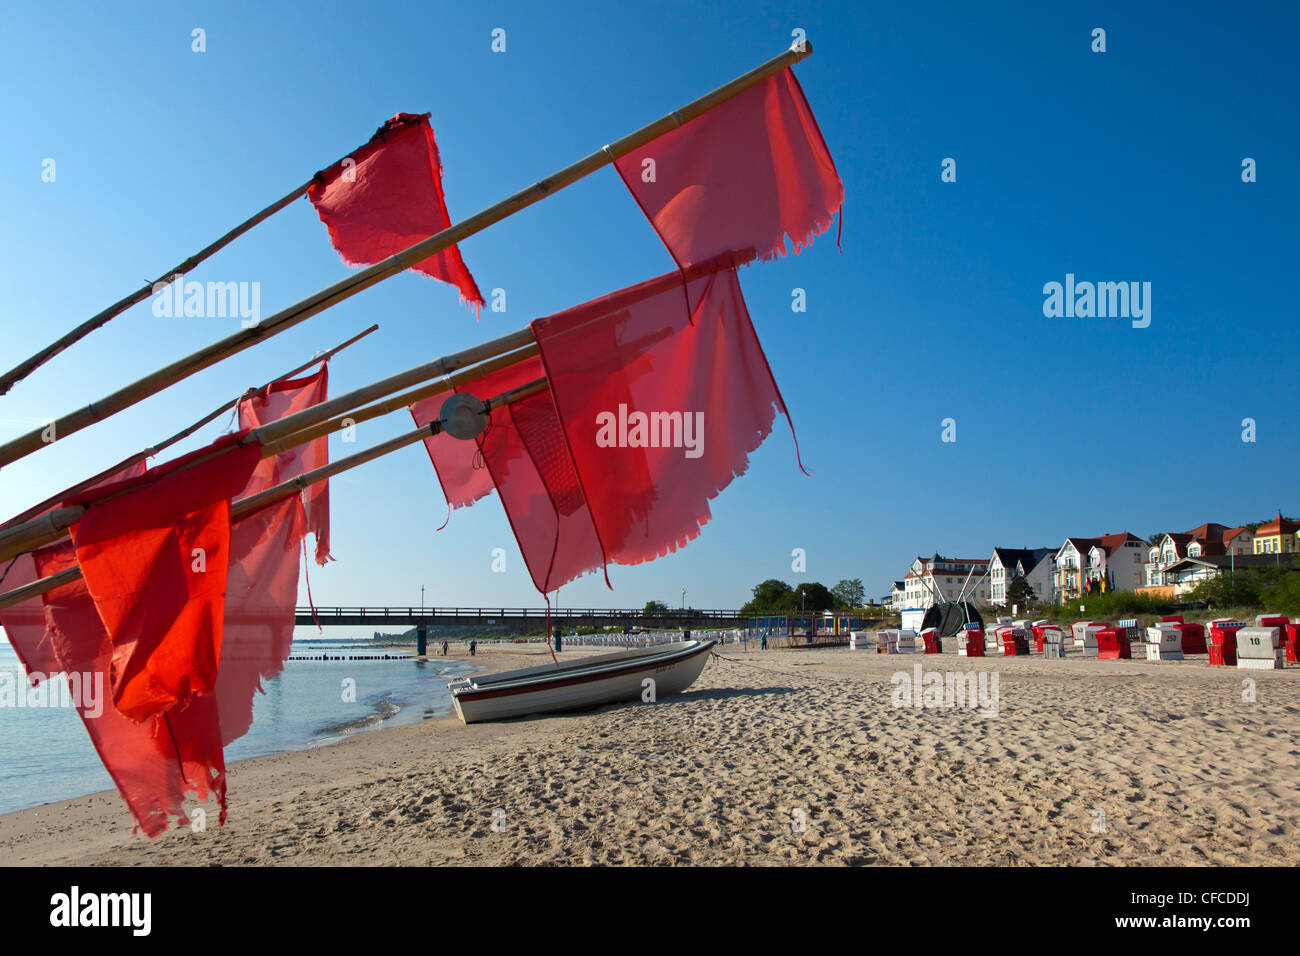 Fishing boat and red flags on the beach, Bansin seaside resort, Usedom island, Baltic Sea, Mecklenburg-West Pomerania, Germany Stock Photo